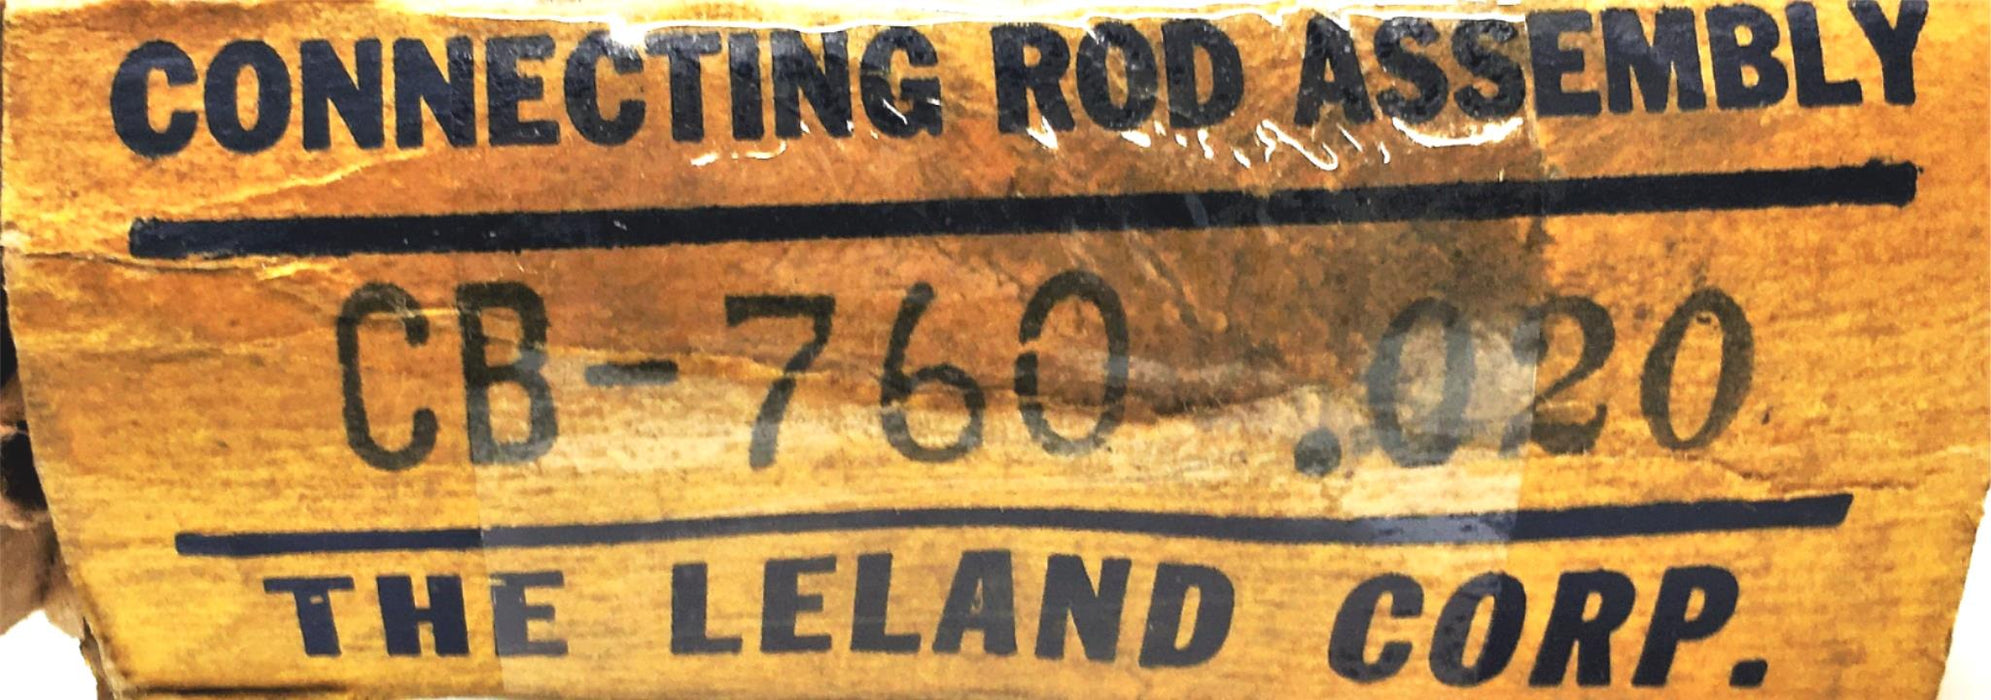 The Leland Corp Connecting Rod Assembly CB-760.020 NOS